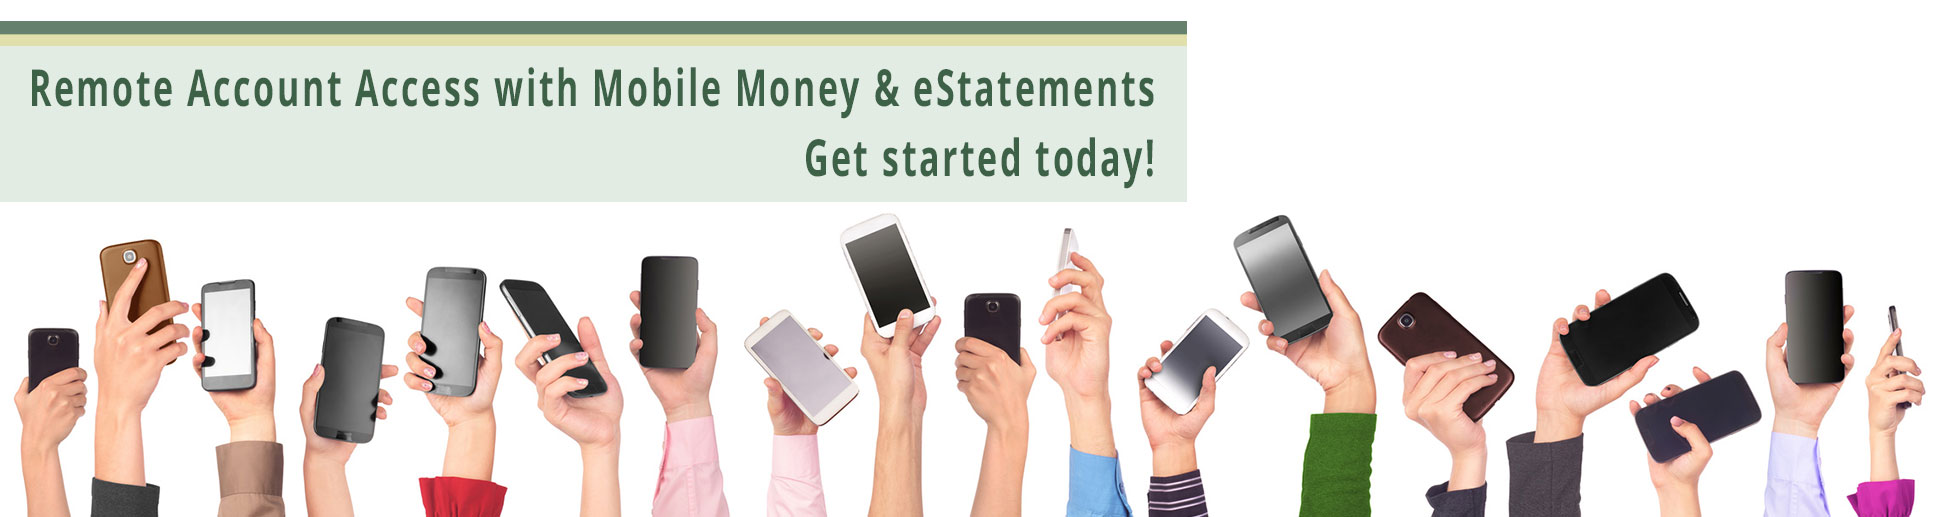 Remote Account Access with Mobile Money & eStatements - Get started today!